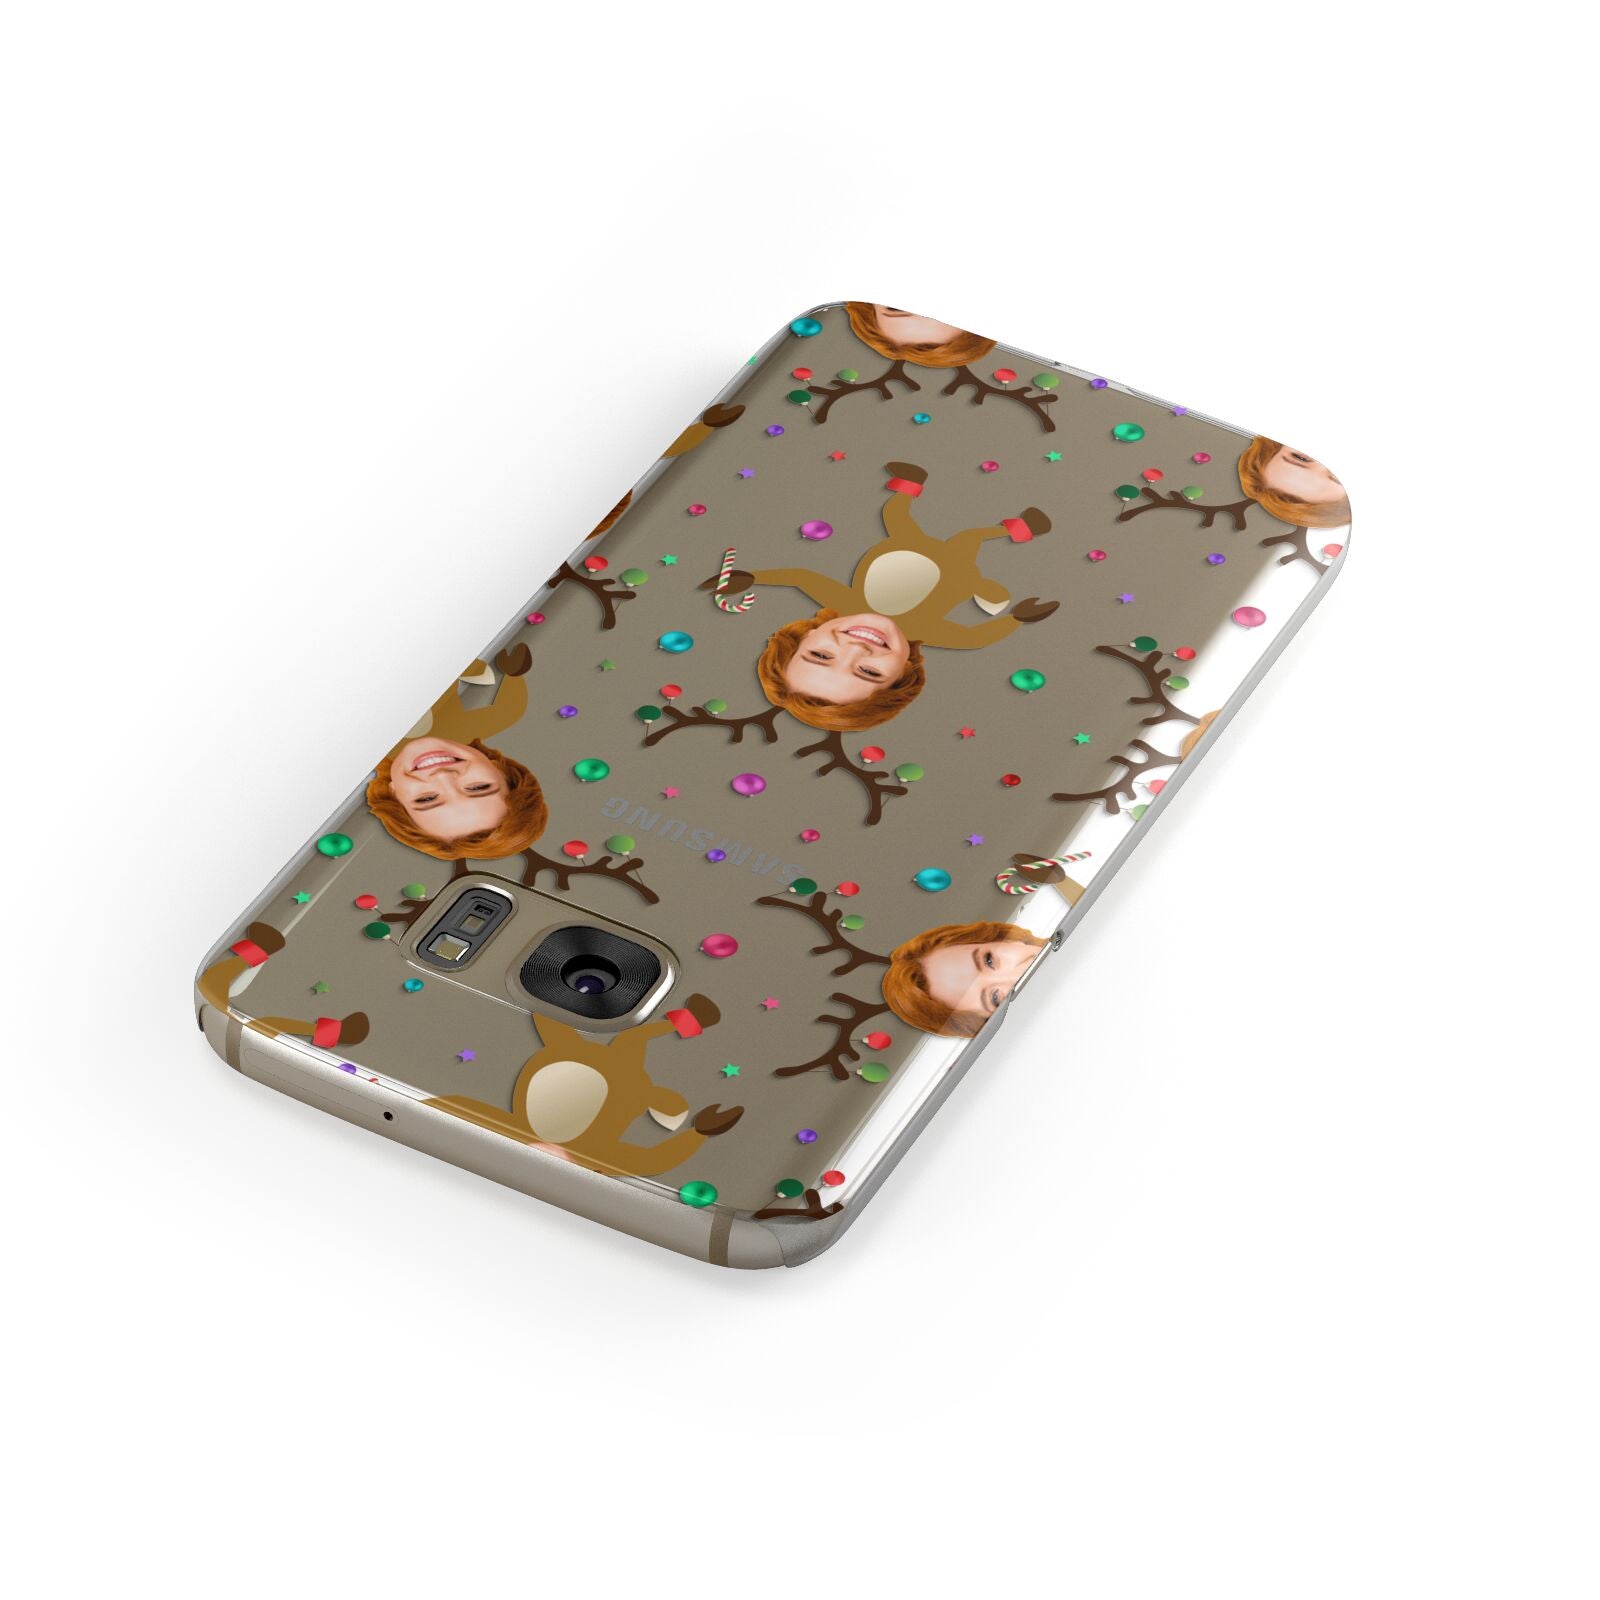 Reindeer Photo Face Samsung Galaxy Case Front Close Up